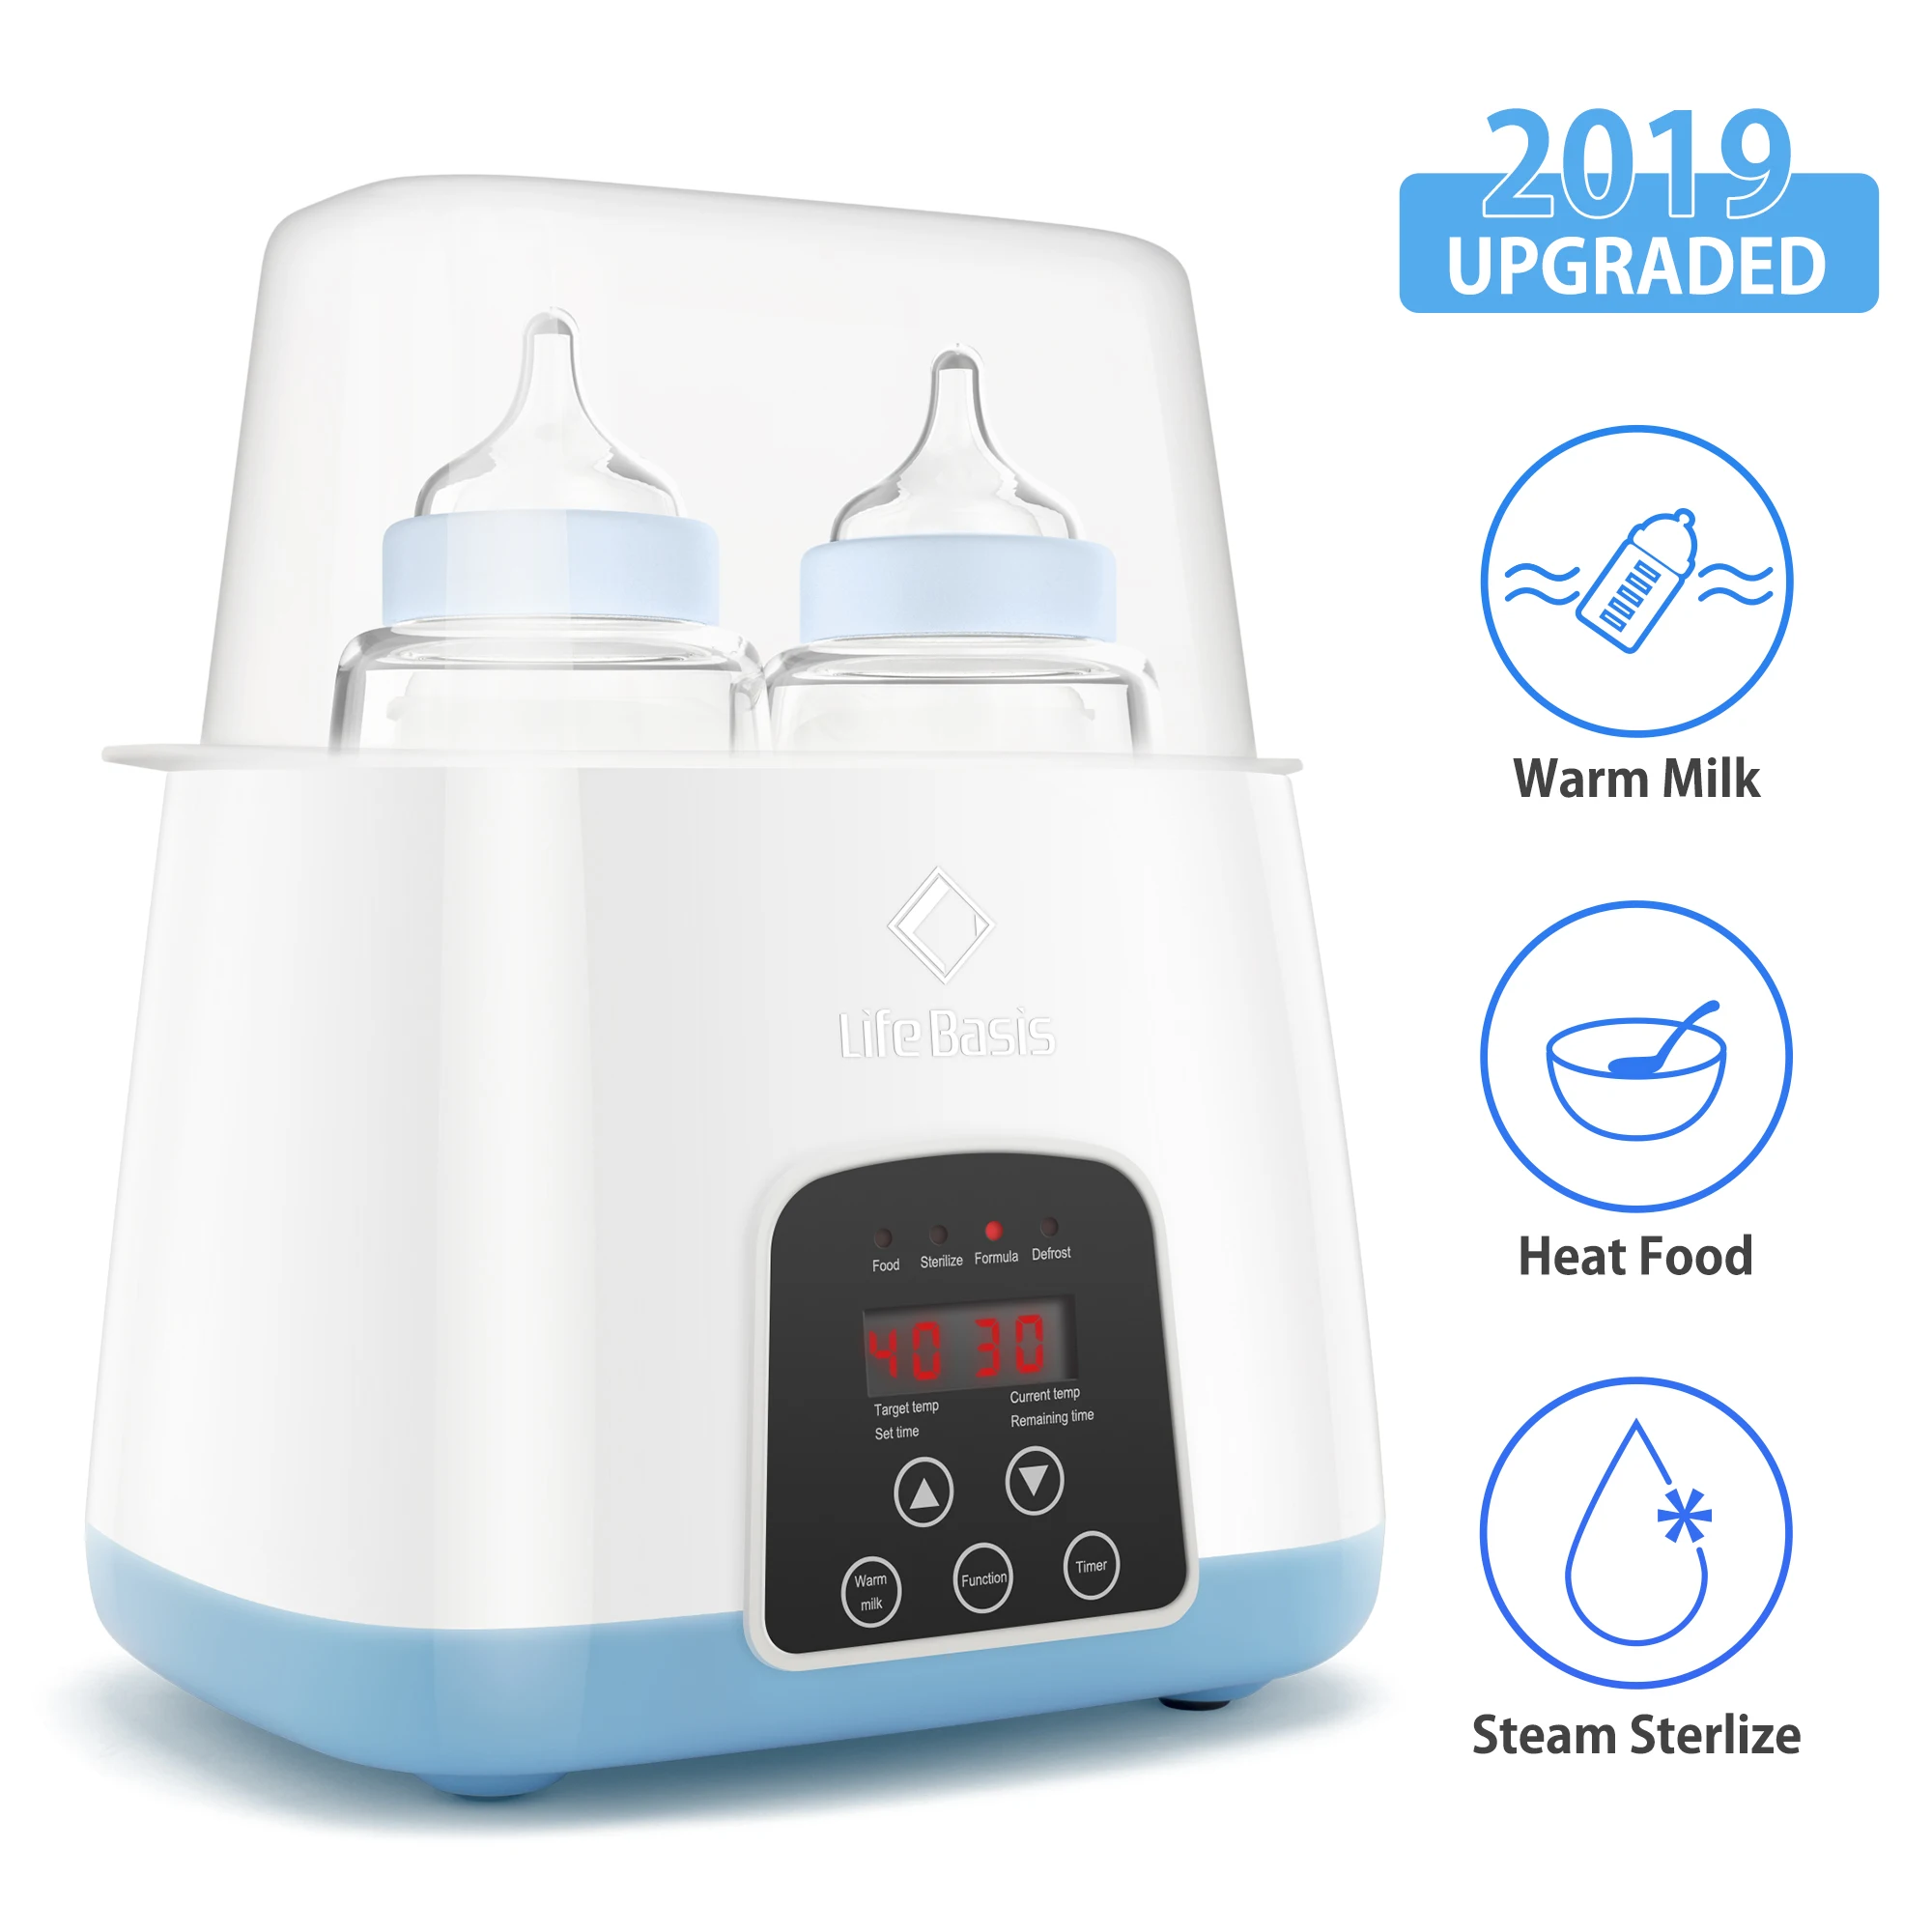 LCD touch screen home use electric baby feeding milk bottle warmer